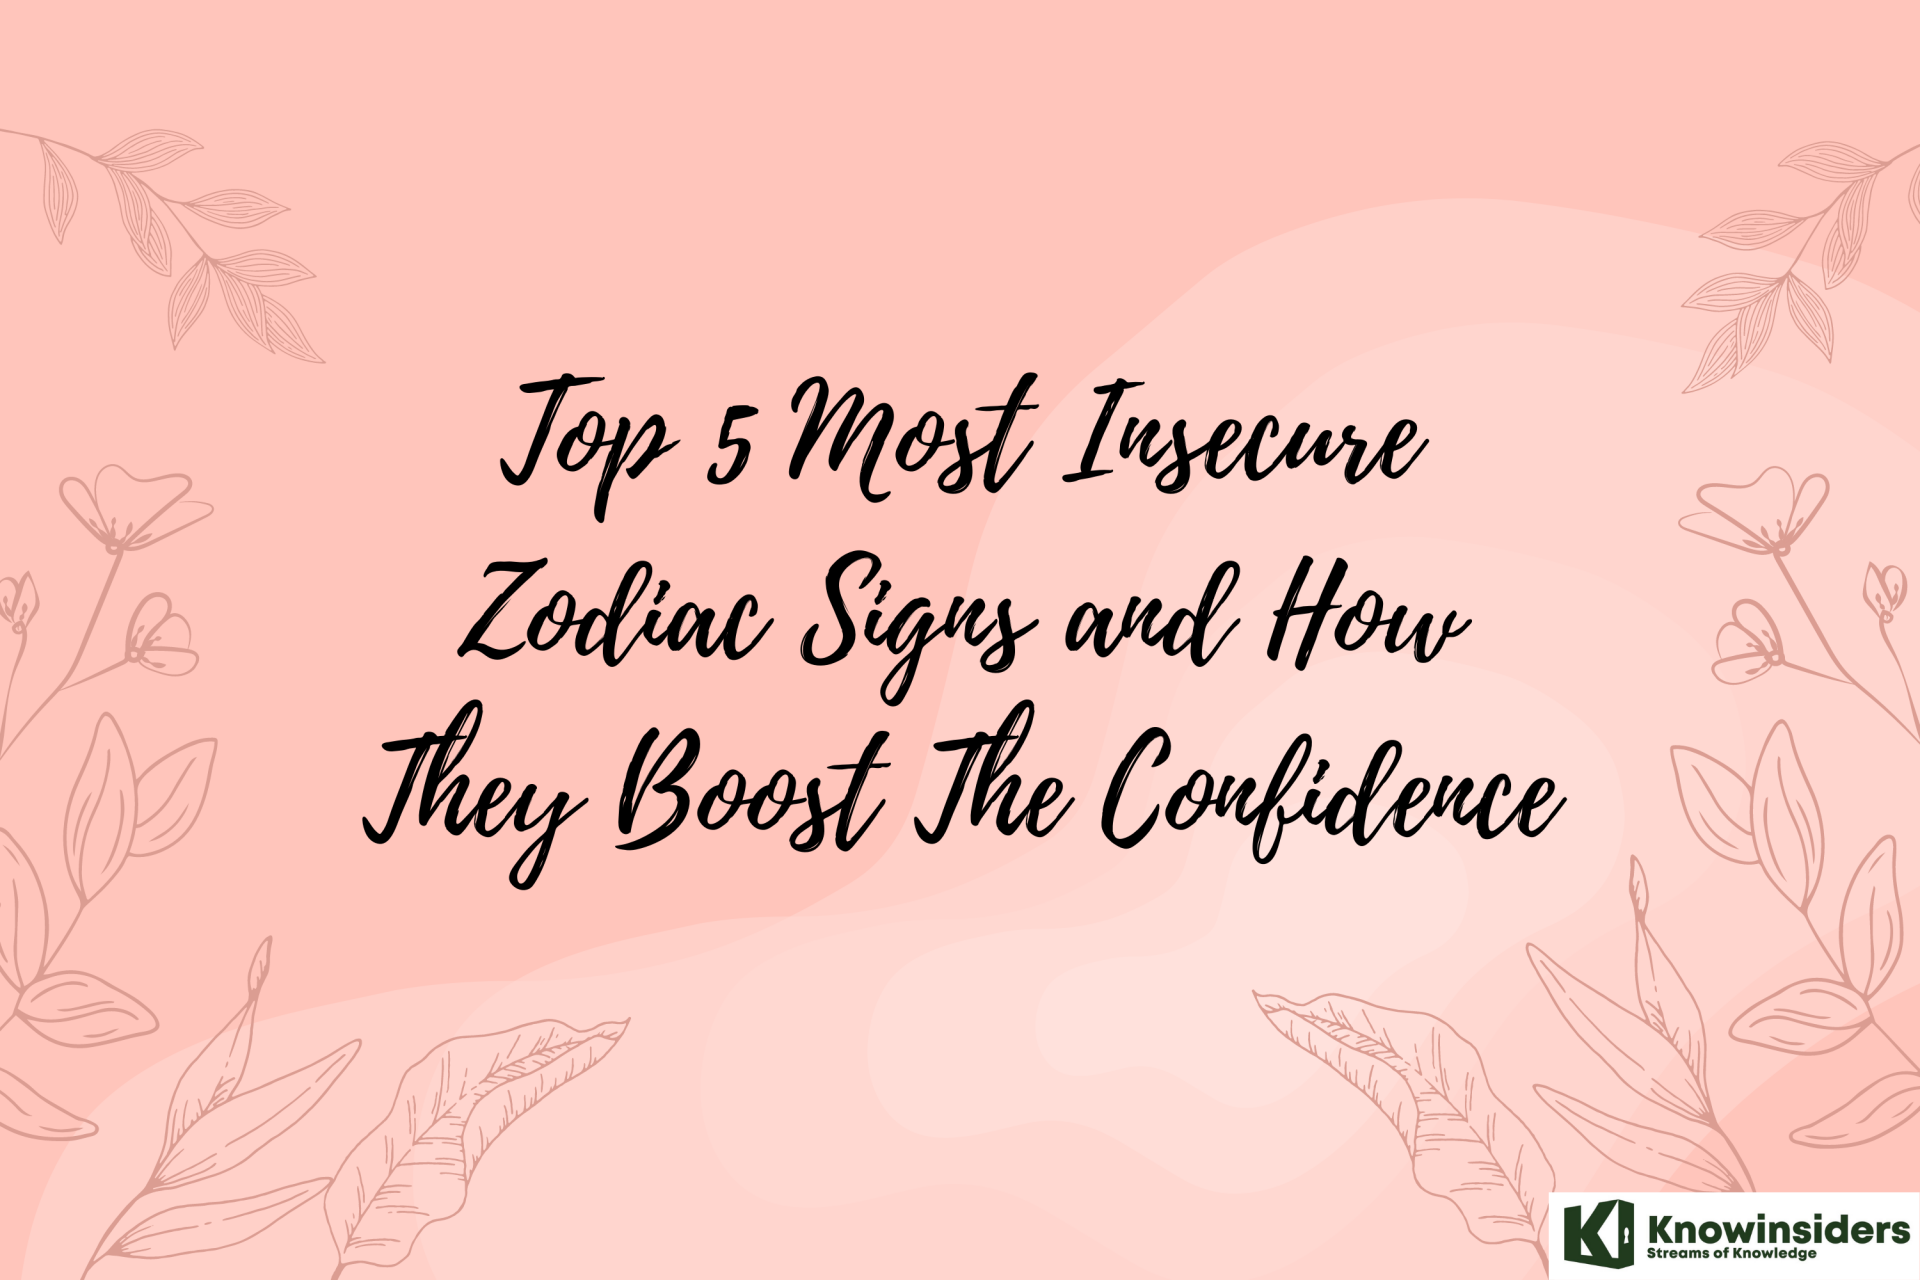 Top 5 Most Insecure Zodiac Signs and How They Boost The Confidence